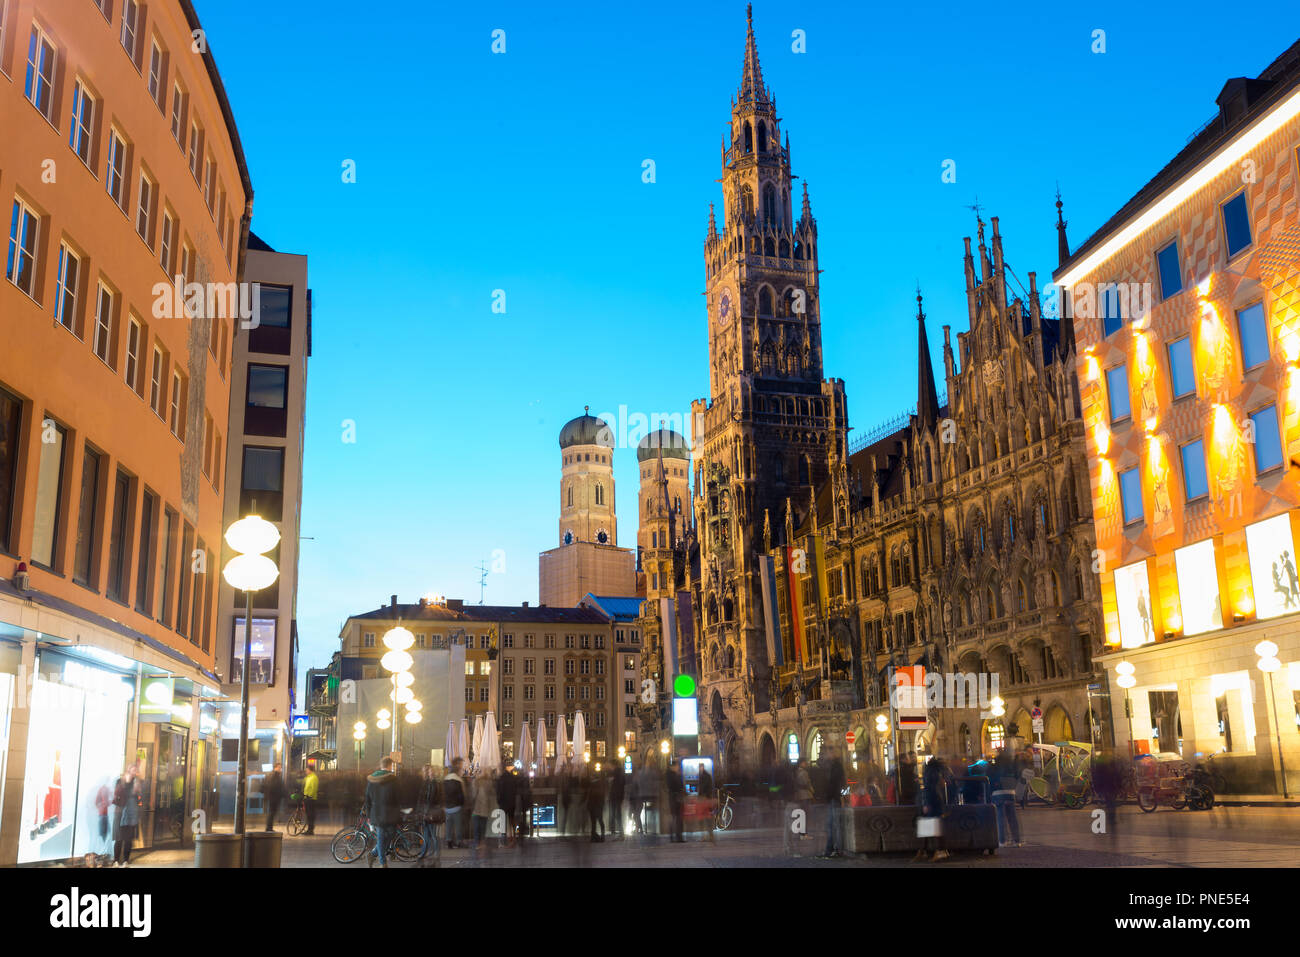 People walking at Marienplatz square and Munich city hall in night in Munich, Germany. Cafes, bars, shops and restaurants. Motion blurred people. Stock Photo